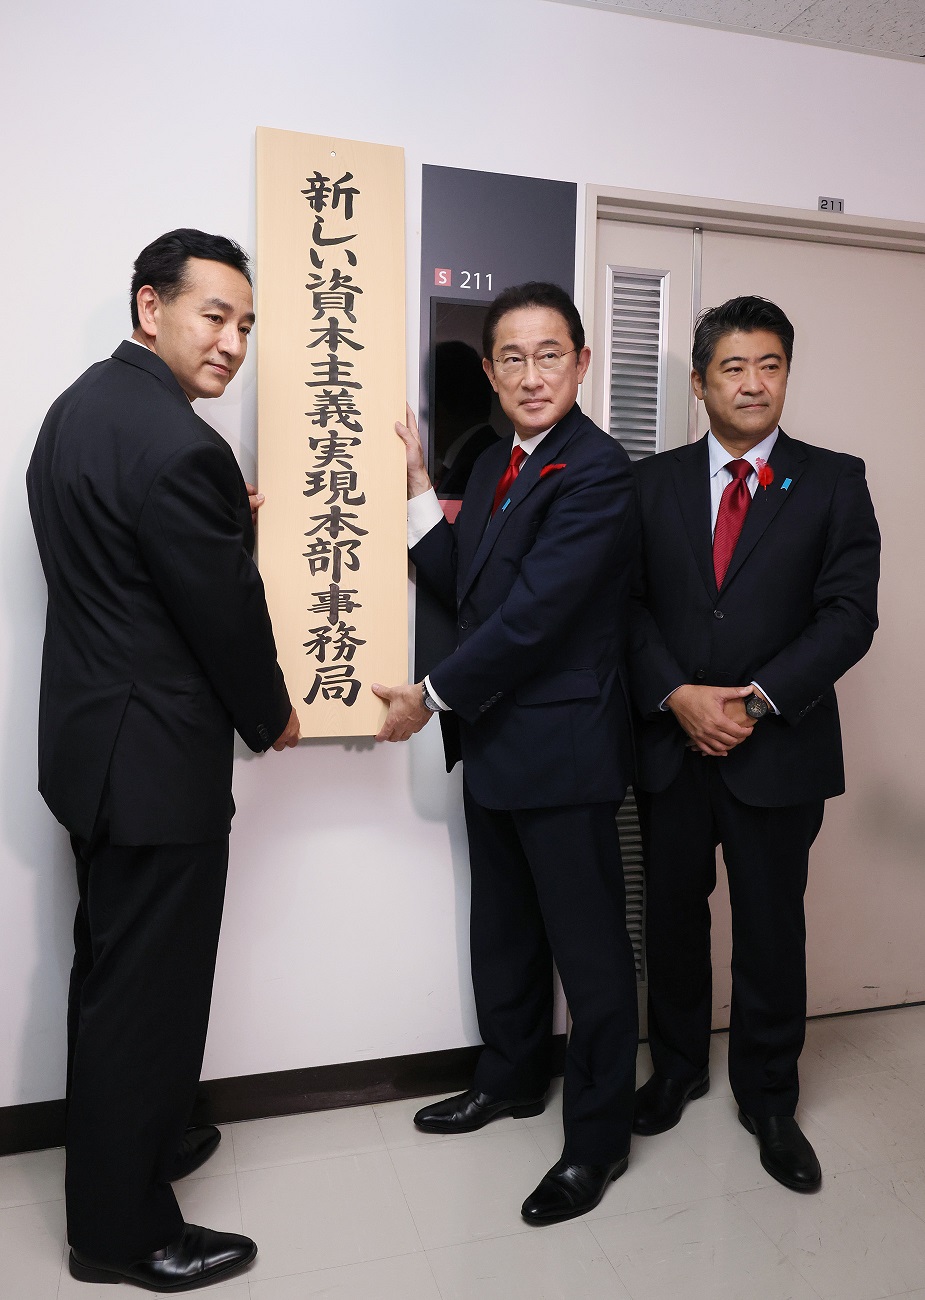 Photograph of the Prime Minister installing a signboard (4)